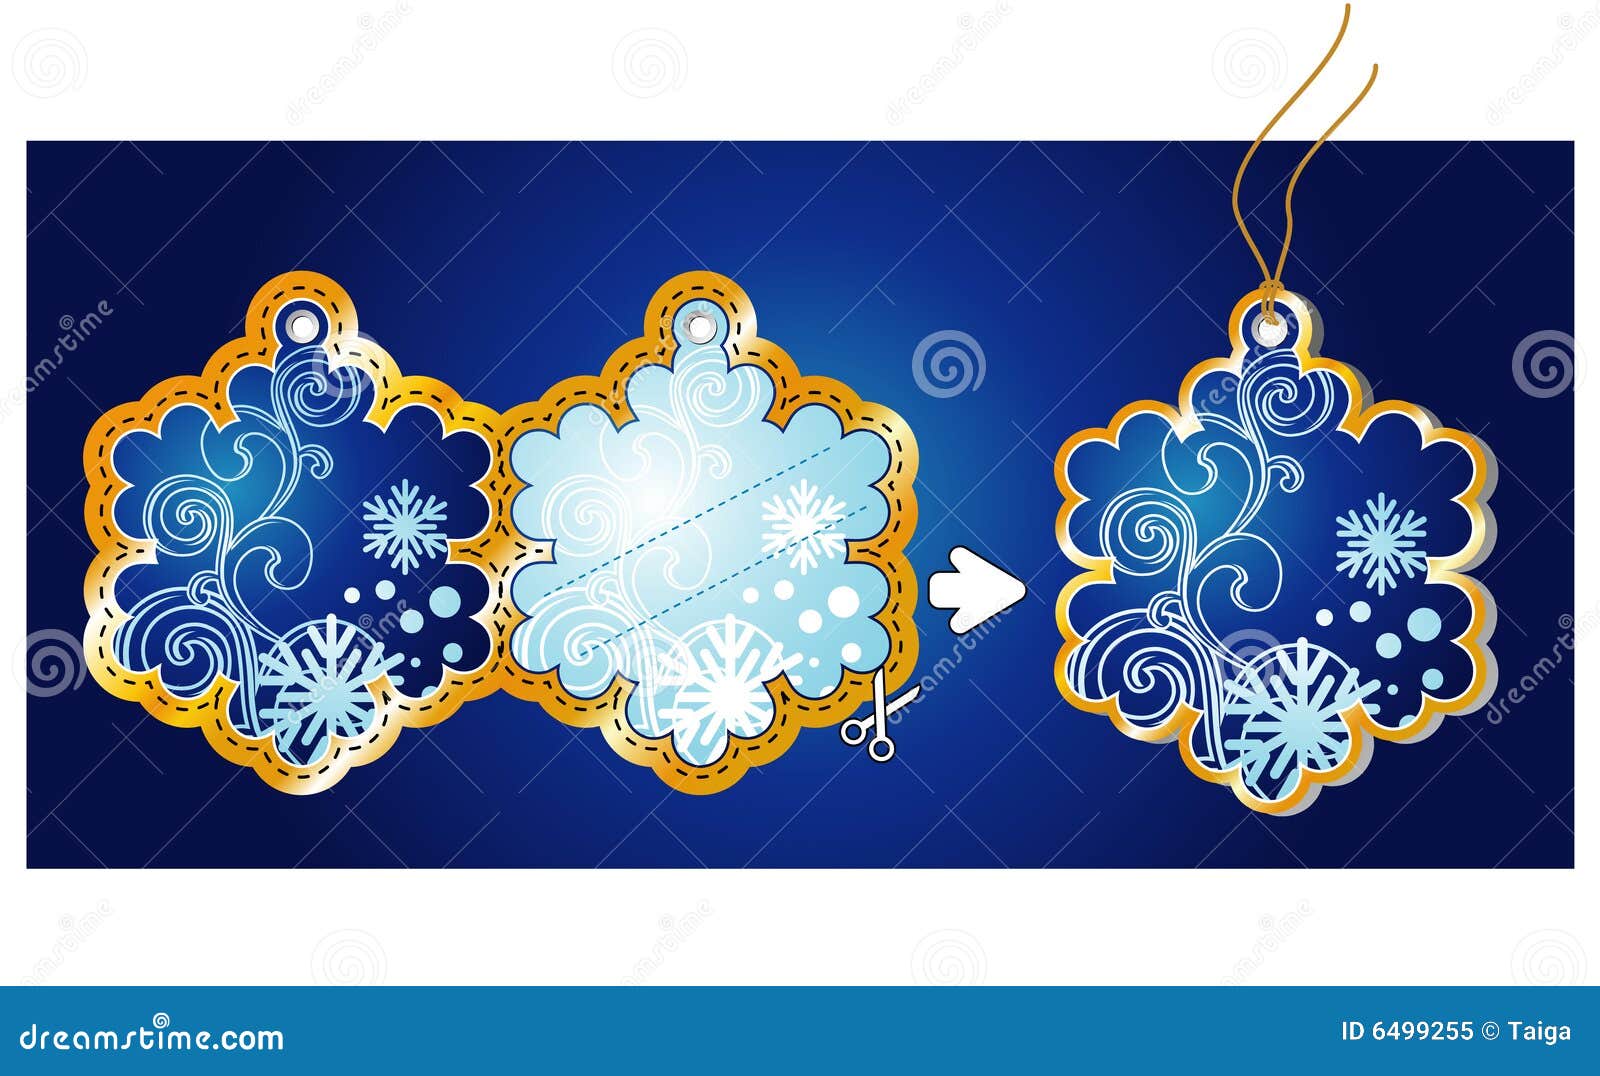 Download Christmas Gift Tag Vector Stock Vector Illustration of paper flyer